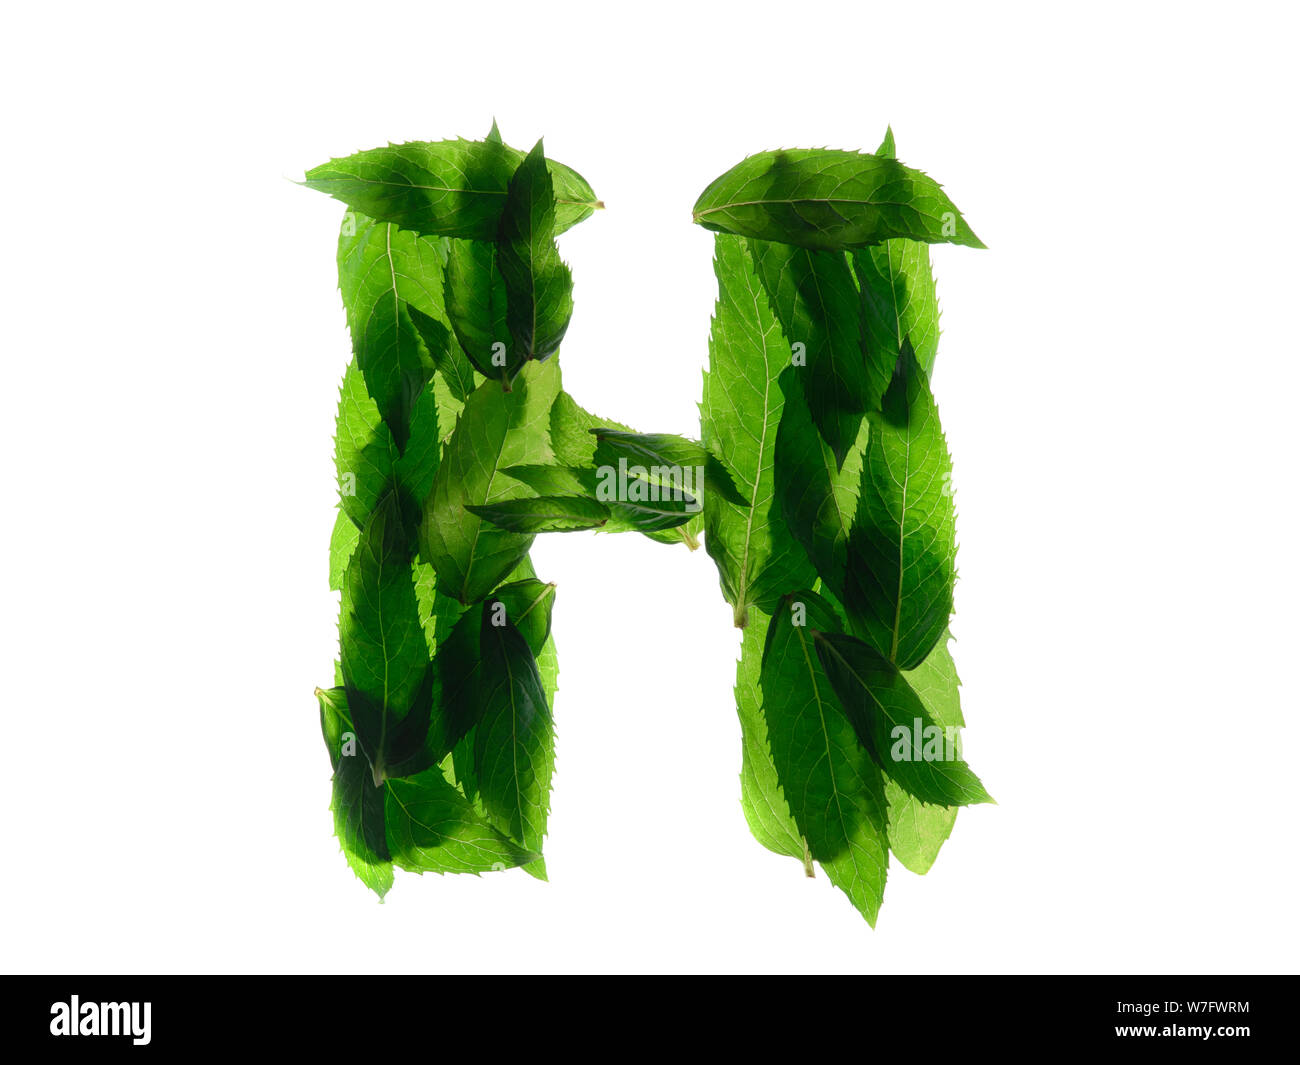 English alphabet made of a mint leaves isolated on white background ...